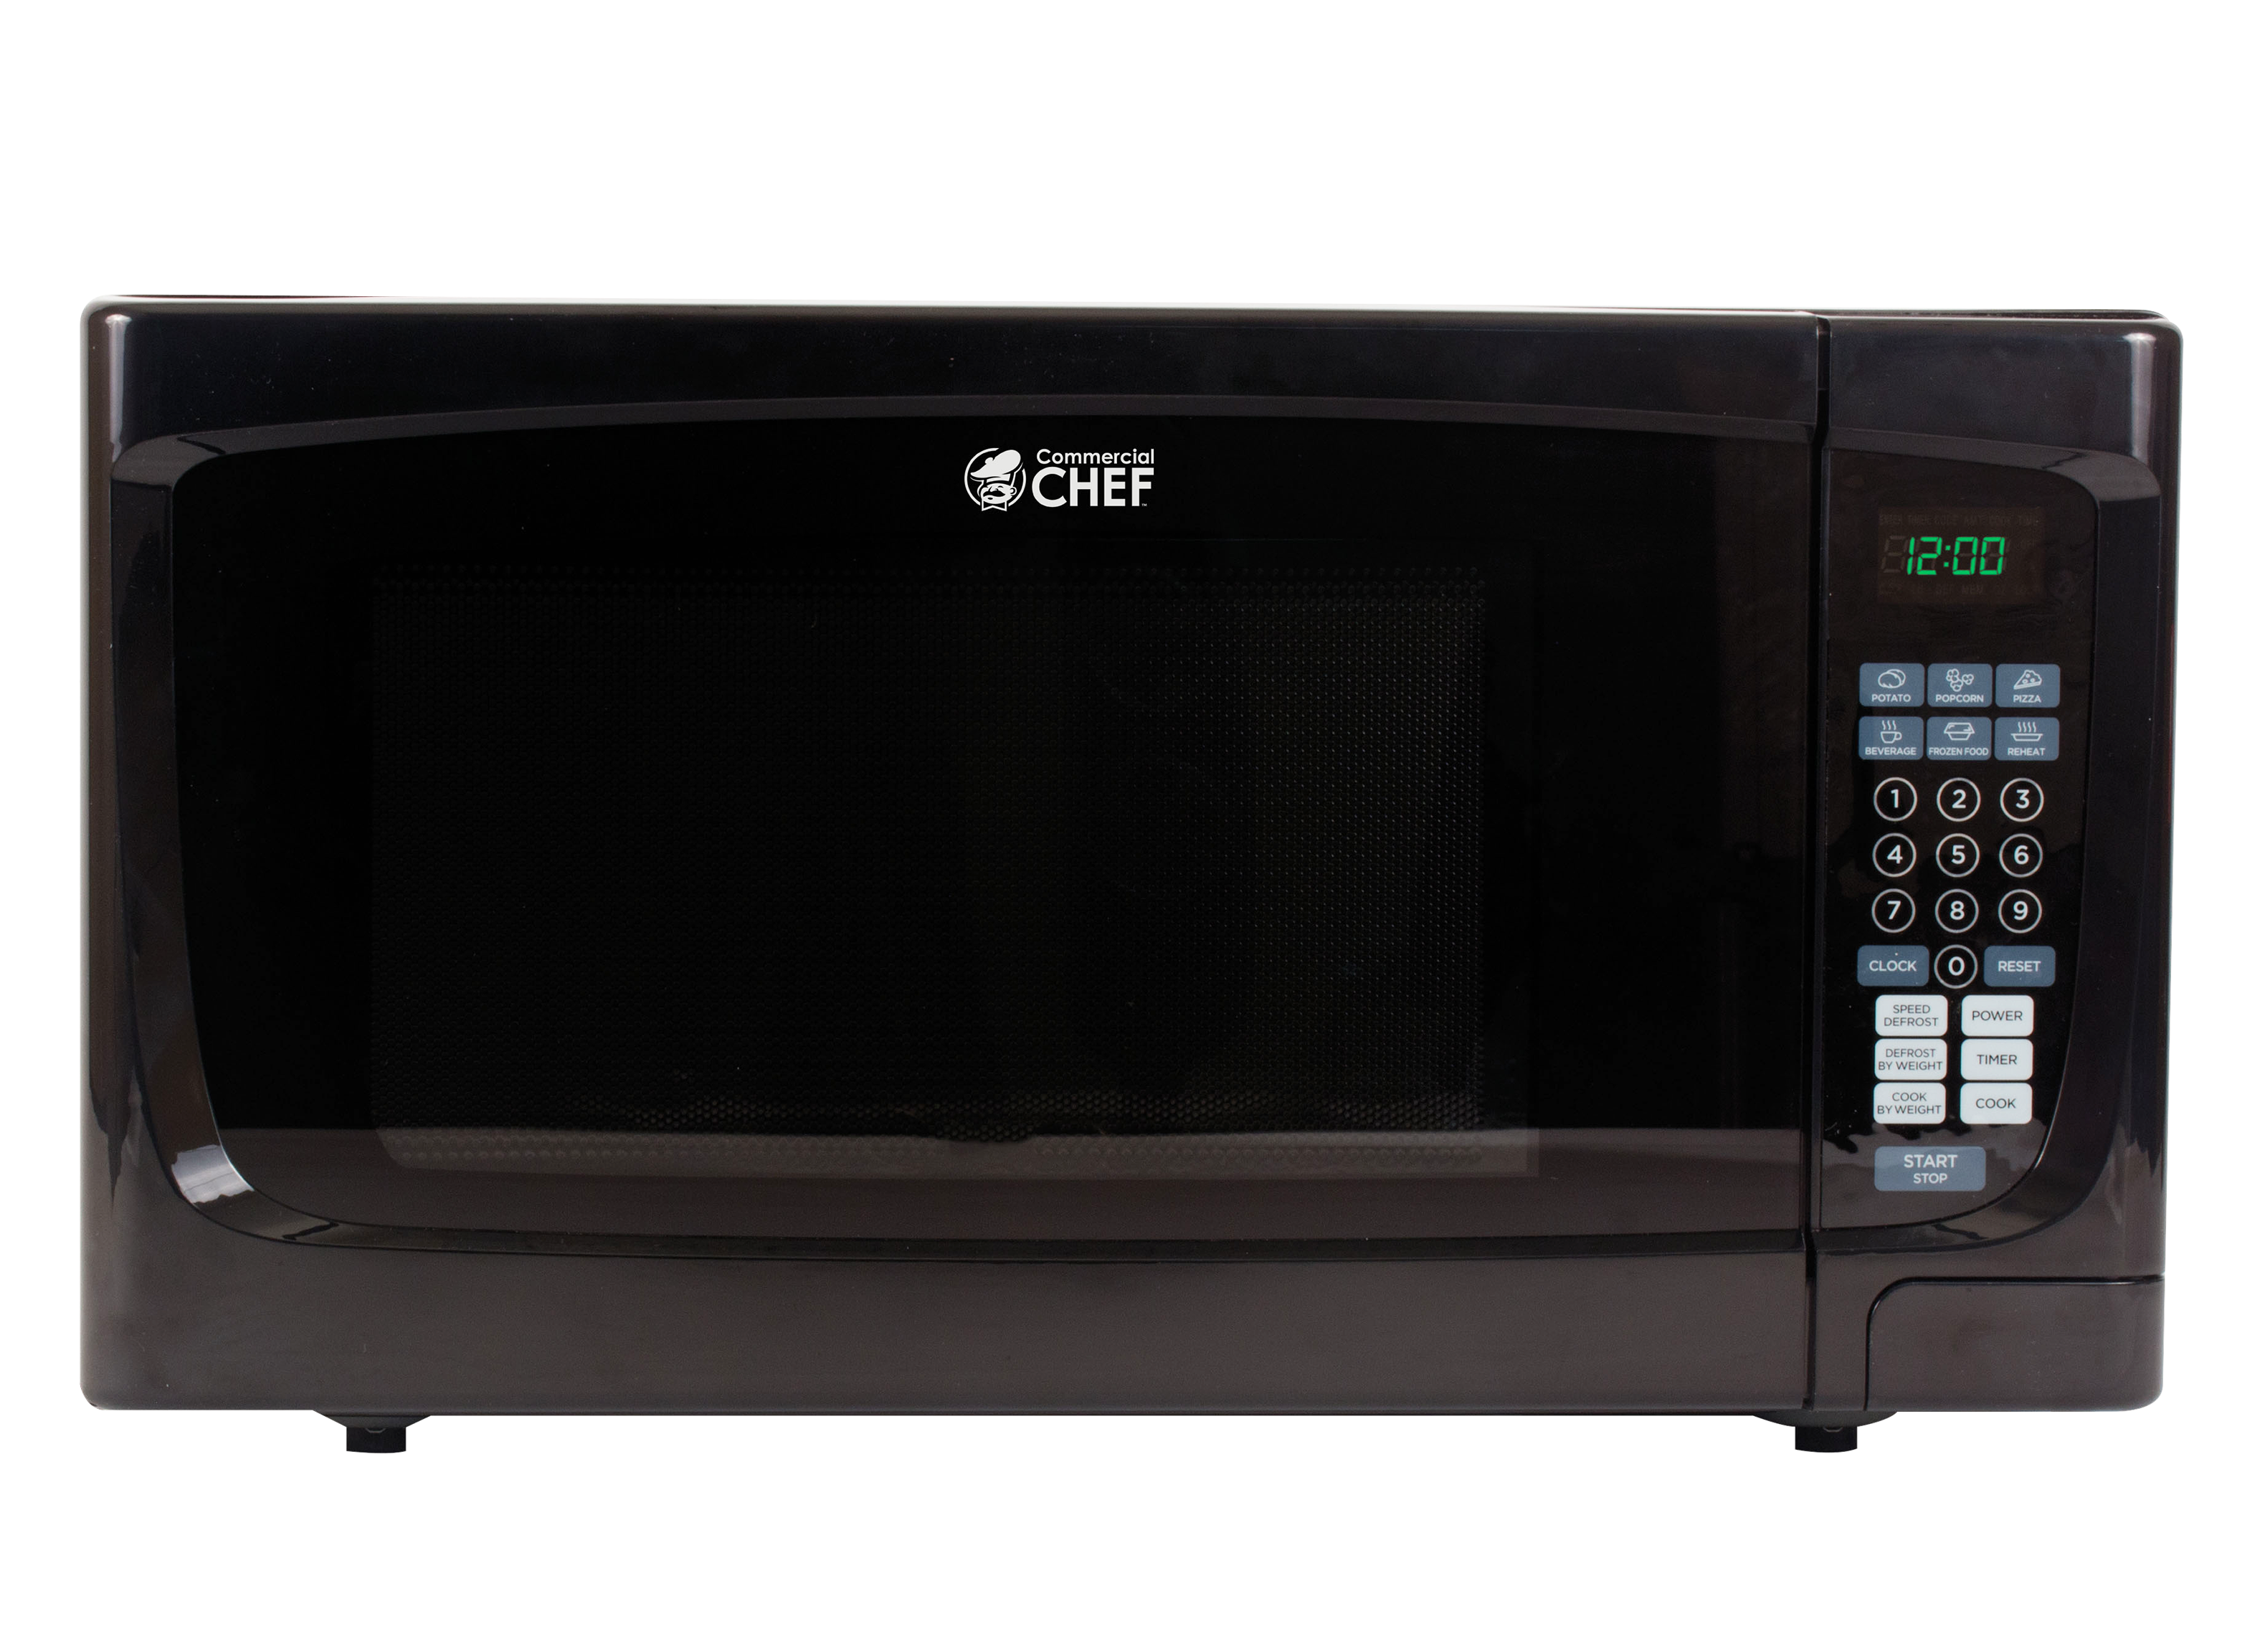 https://crdms.images.consumerreports.org/prod/products/cr/models/406710-large-countertop-microwaves-commercial-chef-chm16100b6c-10029848.png